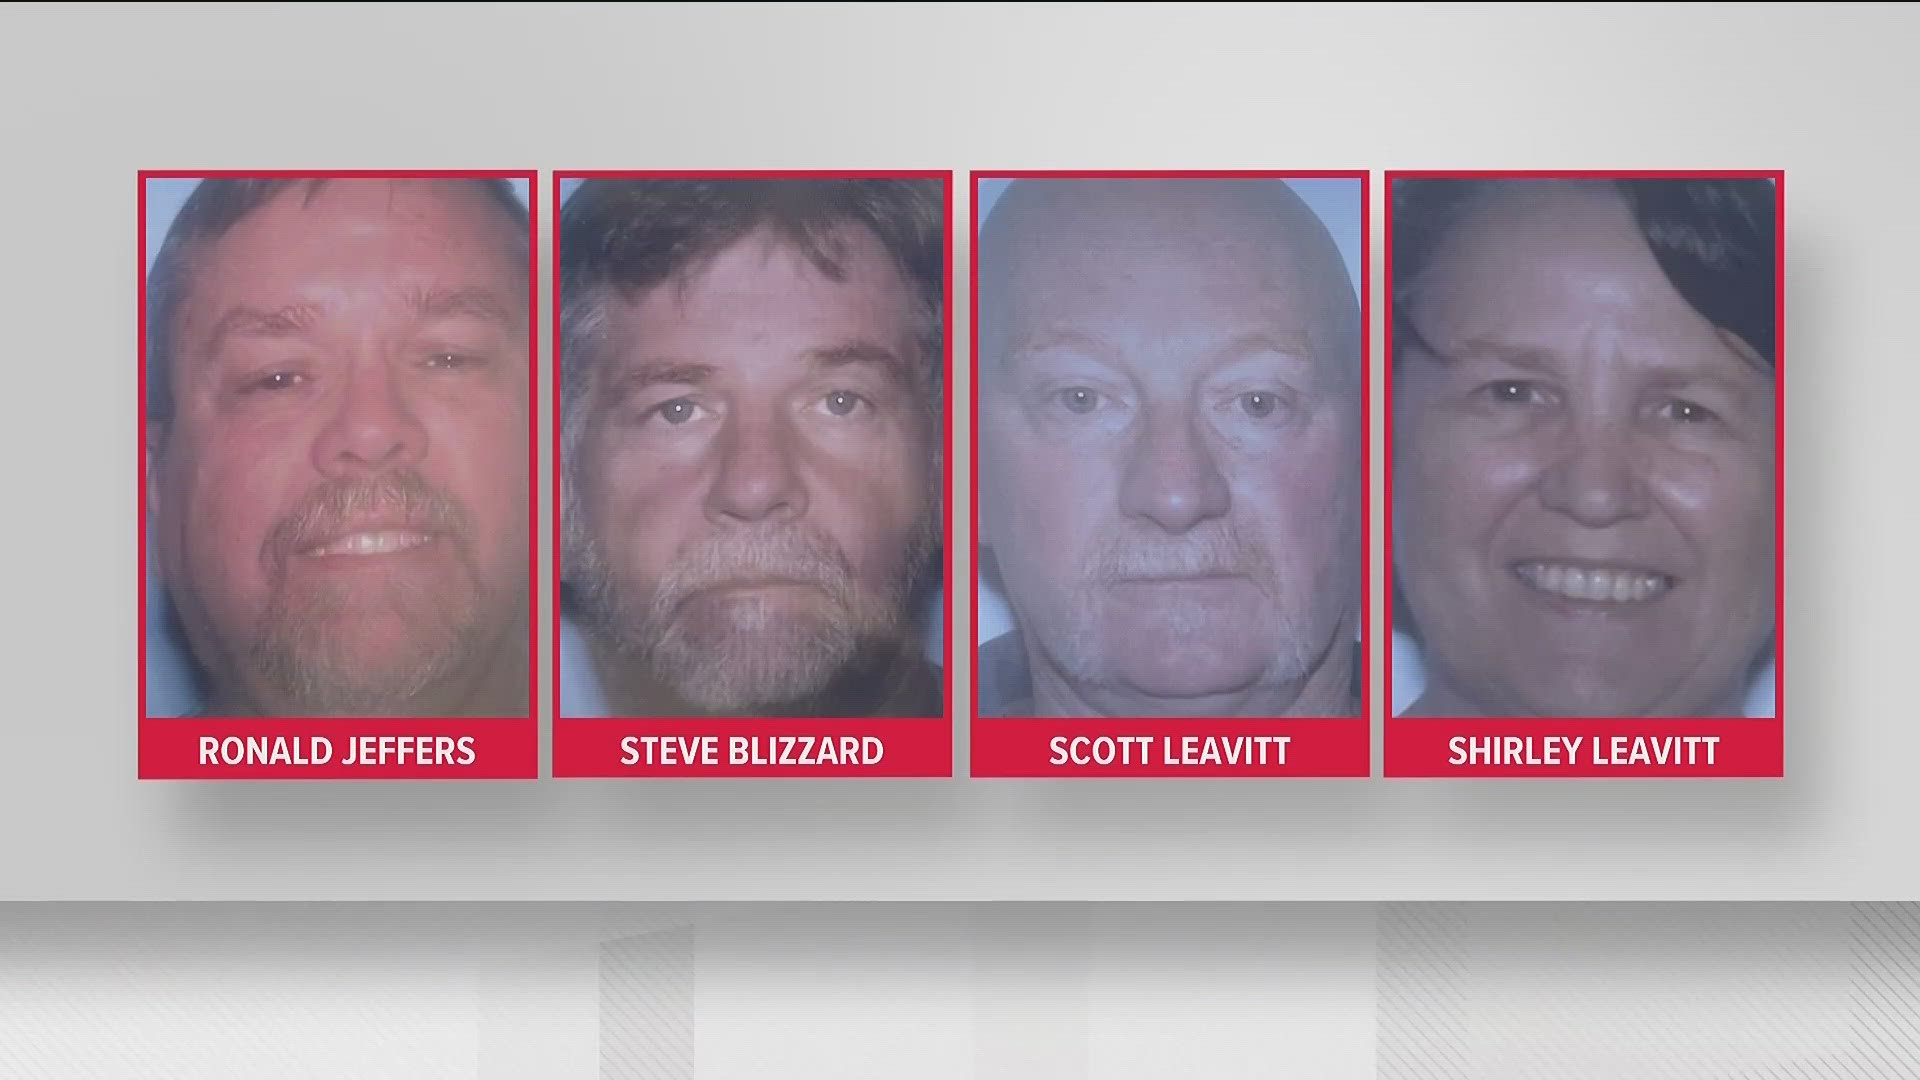 The four victims were identified over the weekend as Shirley Leavitt, her husband Scott Leavitt, Steve Blizzard and Ron Jeffers.